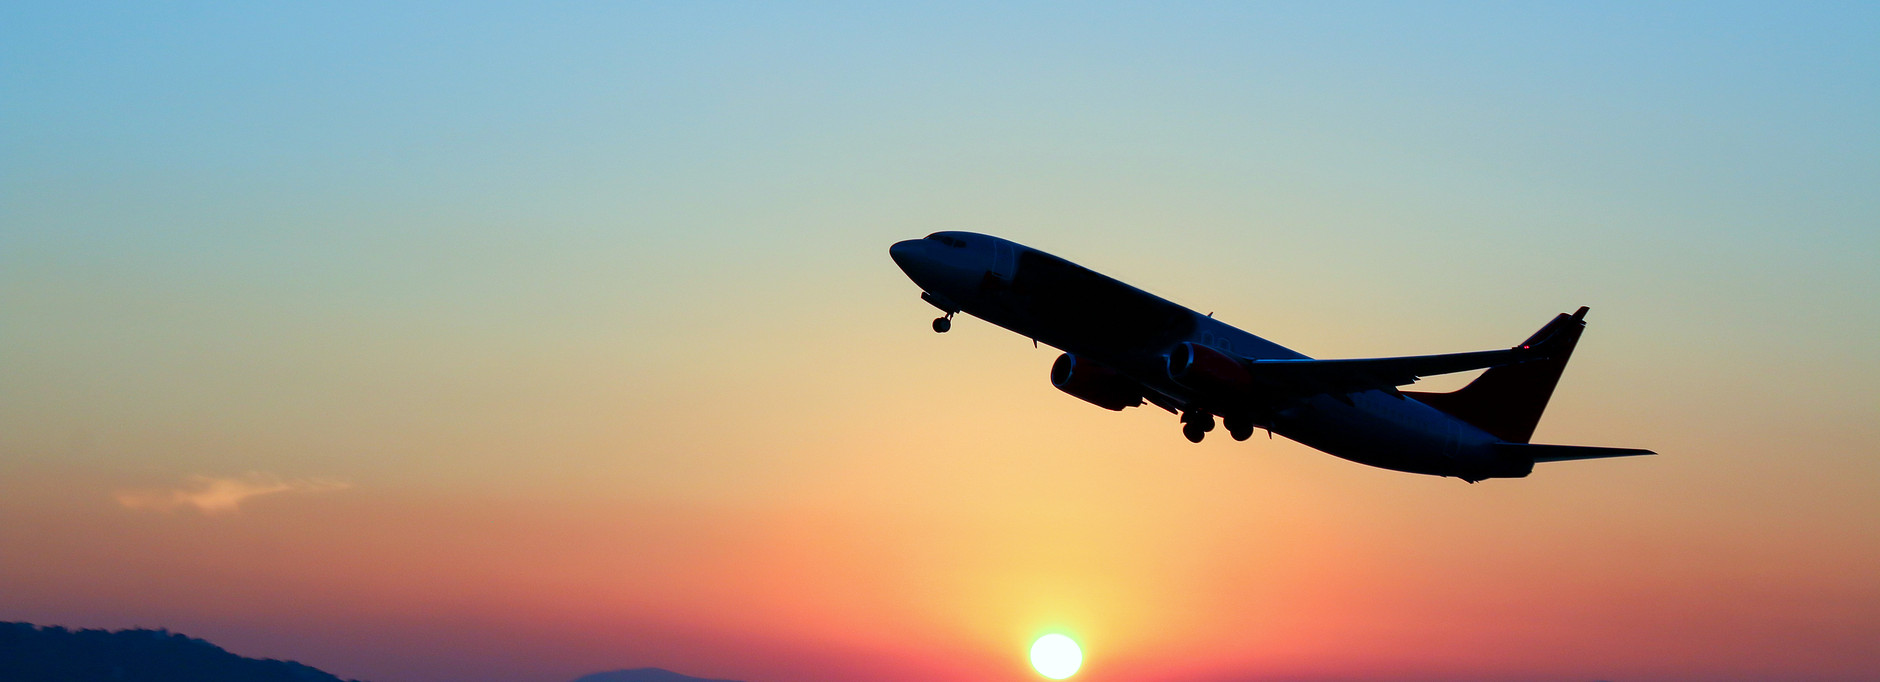 Cheap Airline Tickets: Tips for Finding and Booking the Best Deals